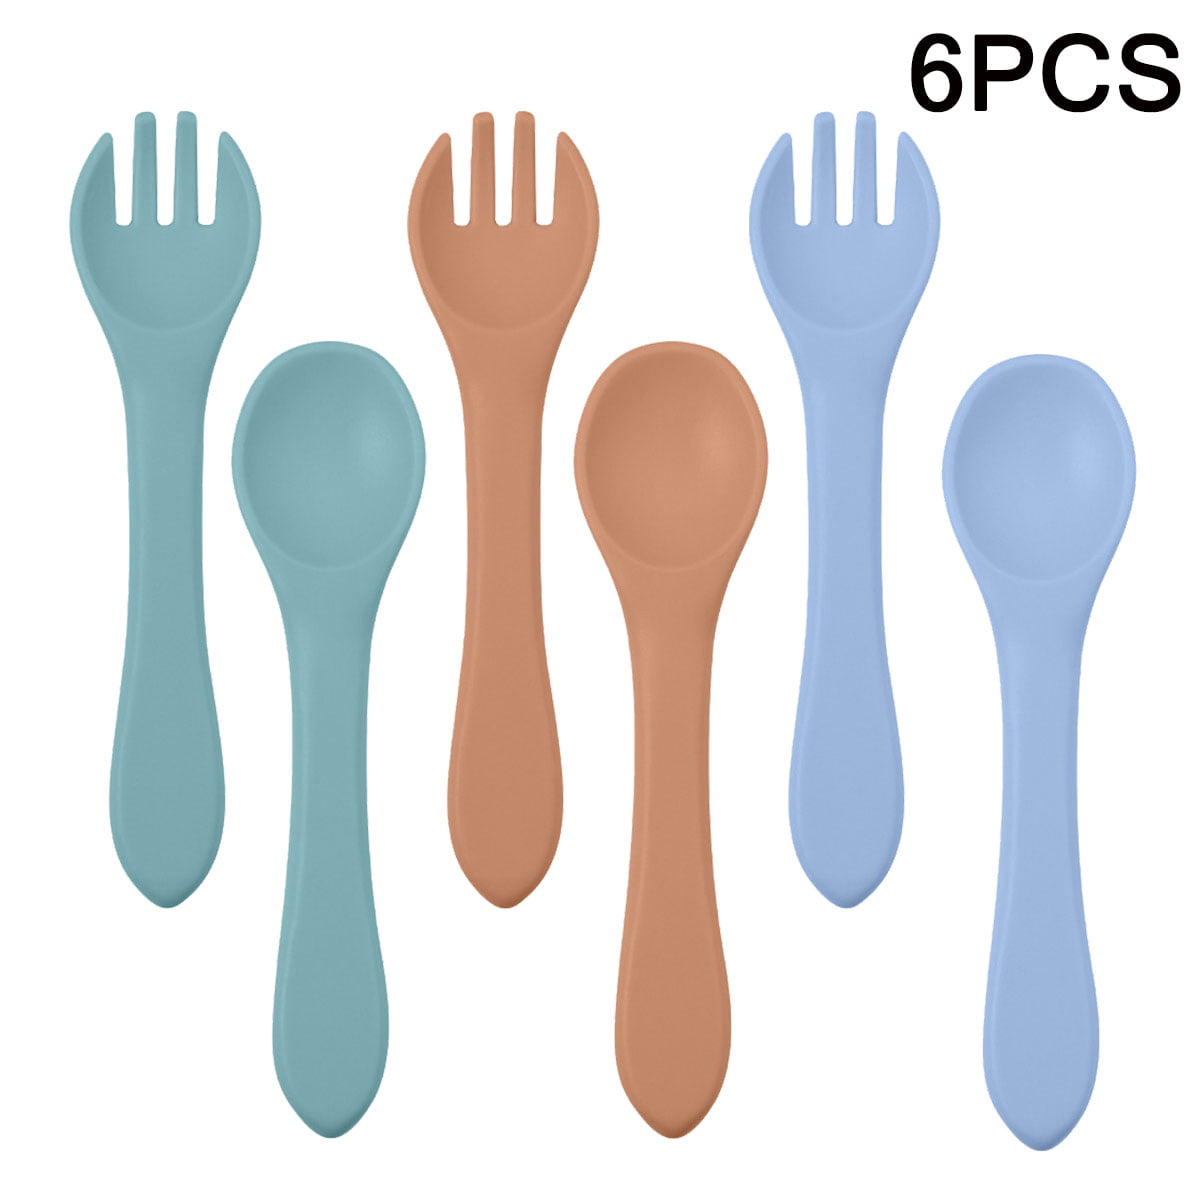 Baby Products Online - Silicone spoons for baby first stage for baby eating  utensils packages), LED packing spoon for baby for toddlers Self-feeding  training - Kideno